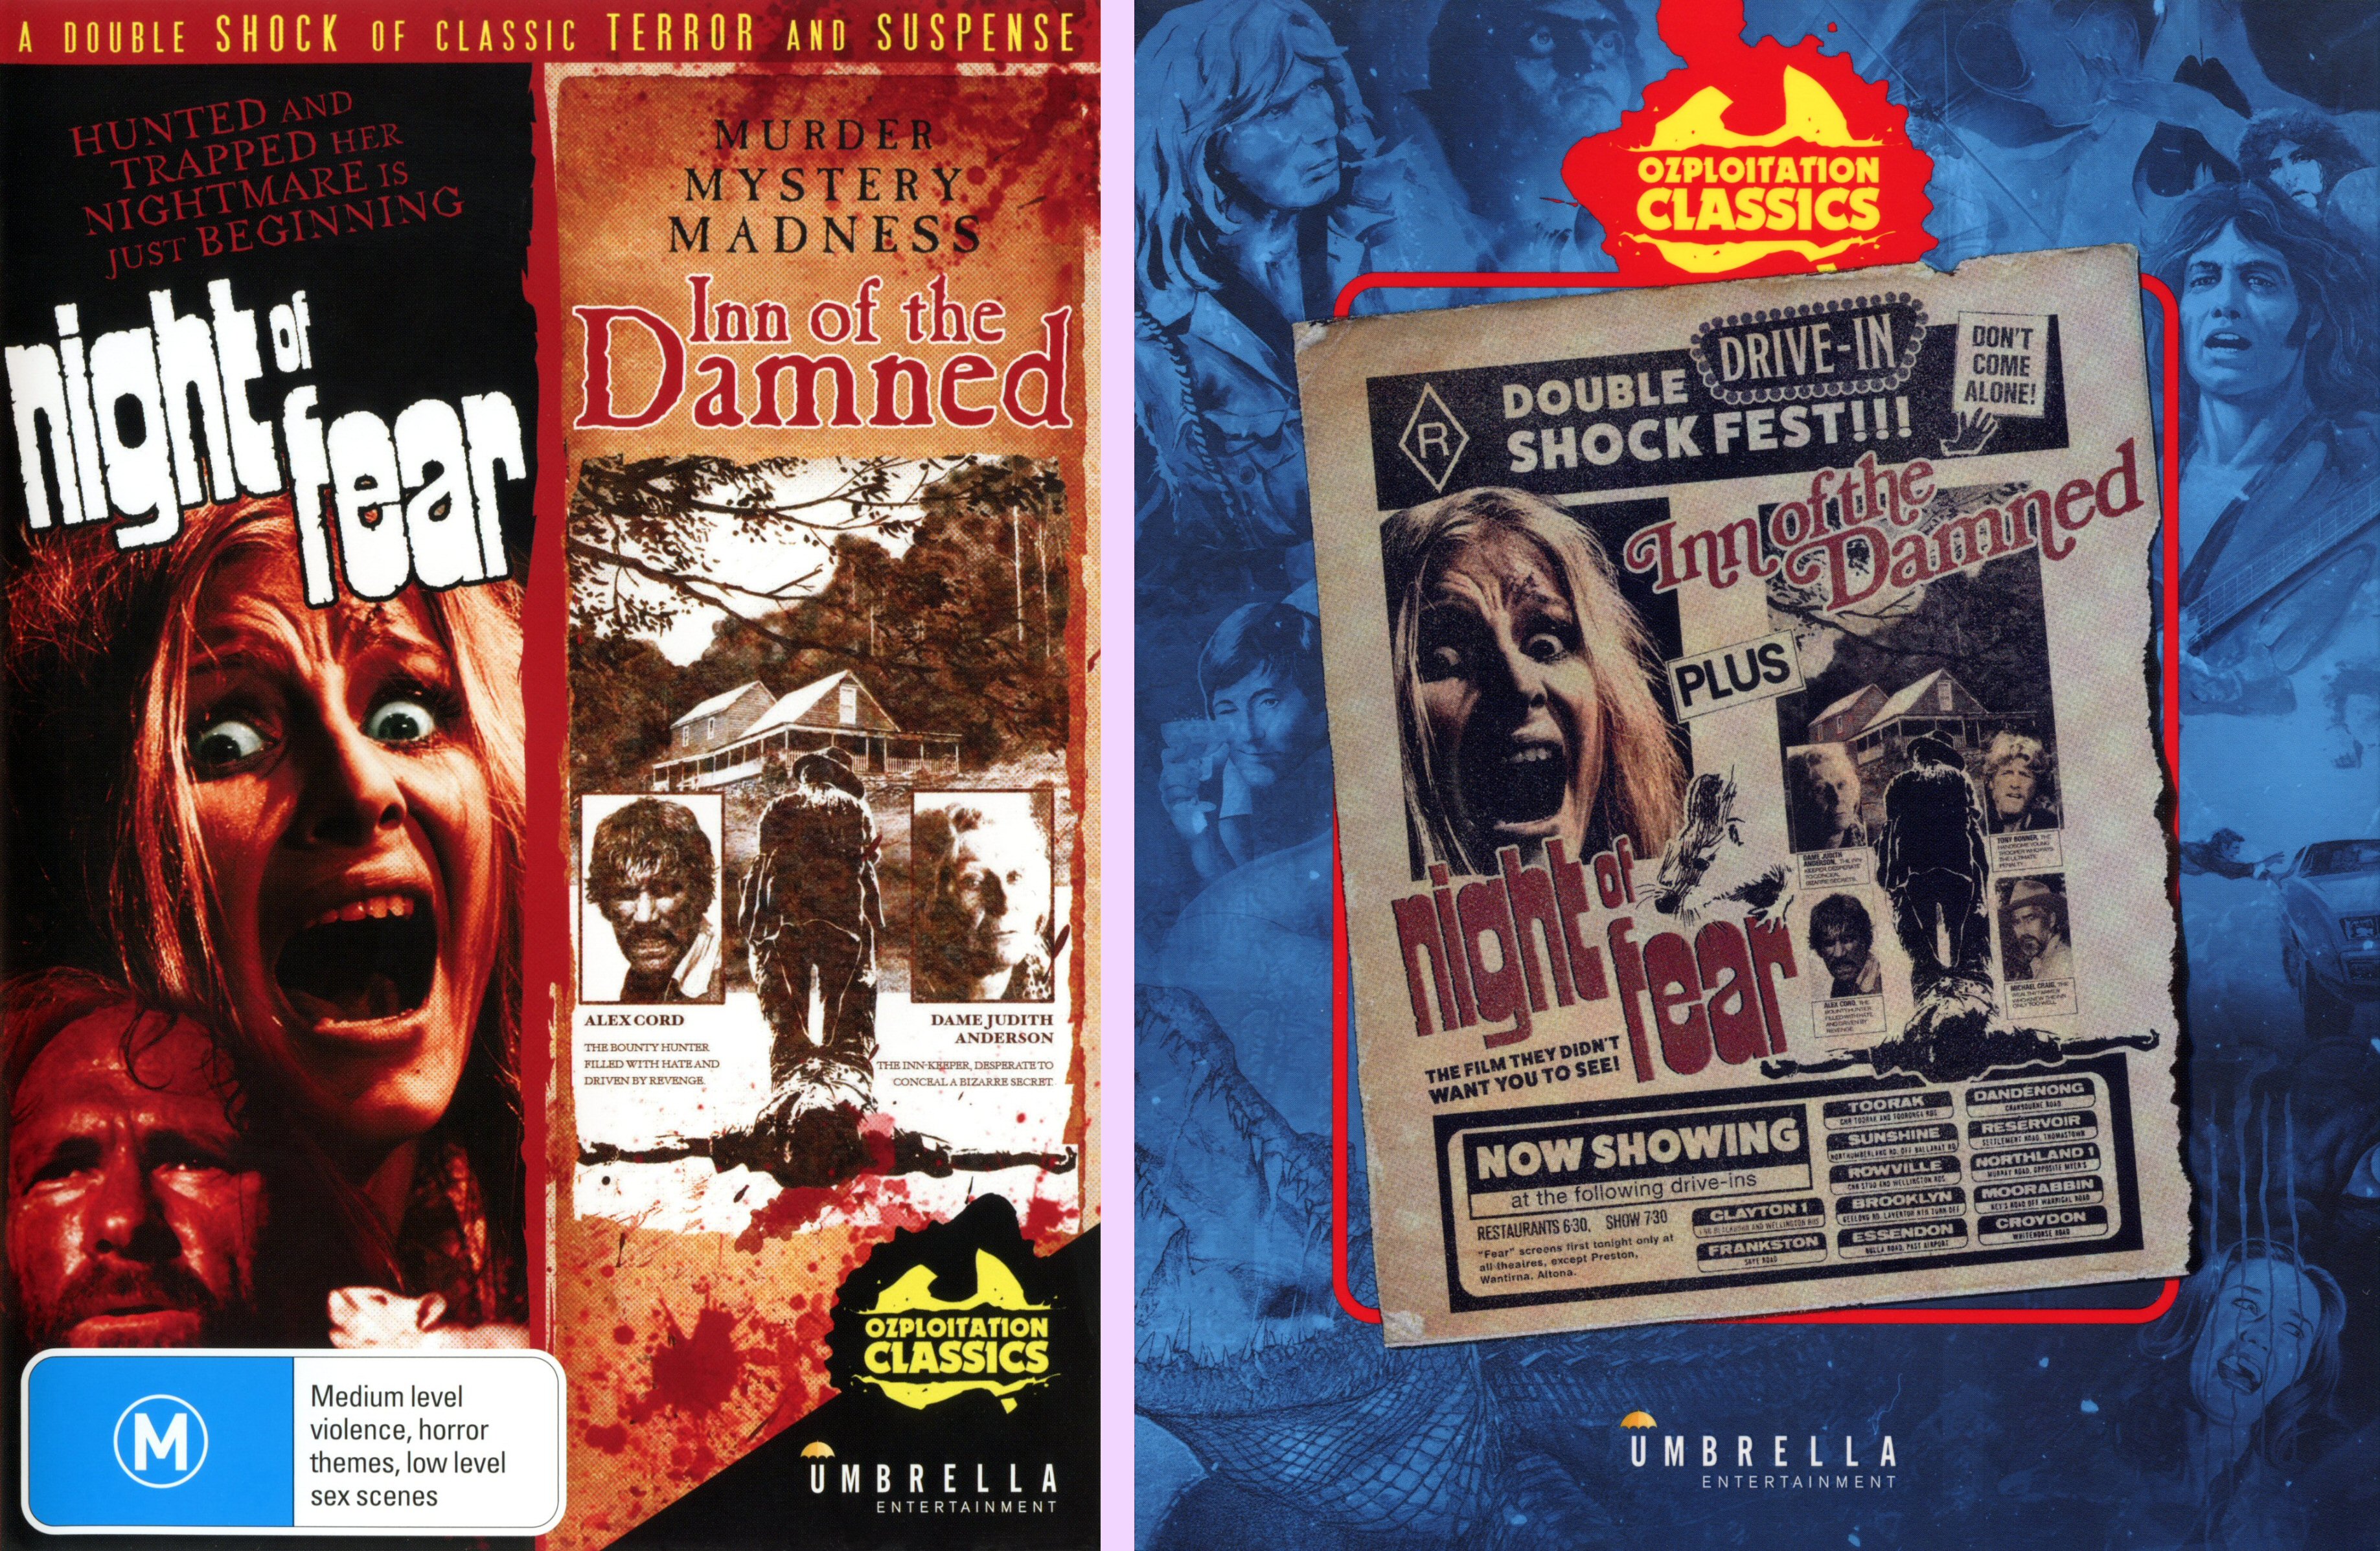 DVD Exotica Ozploitation Classics Inn Of the Damned and Night Of Fear image